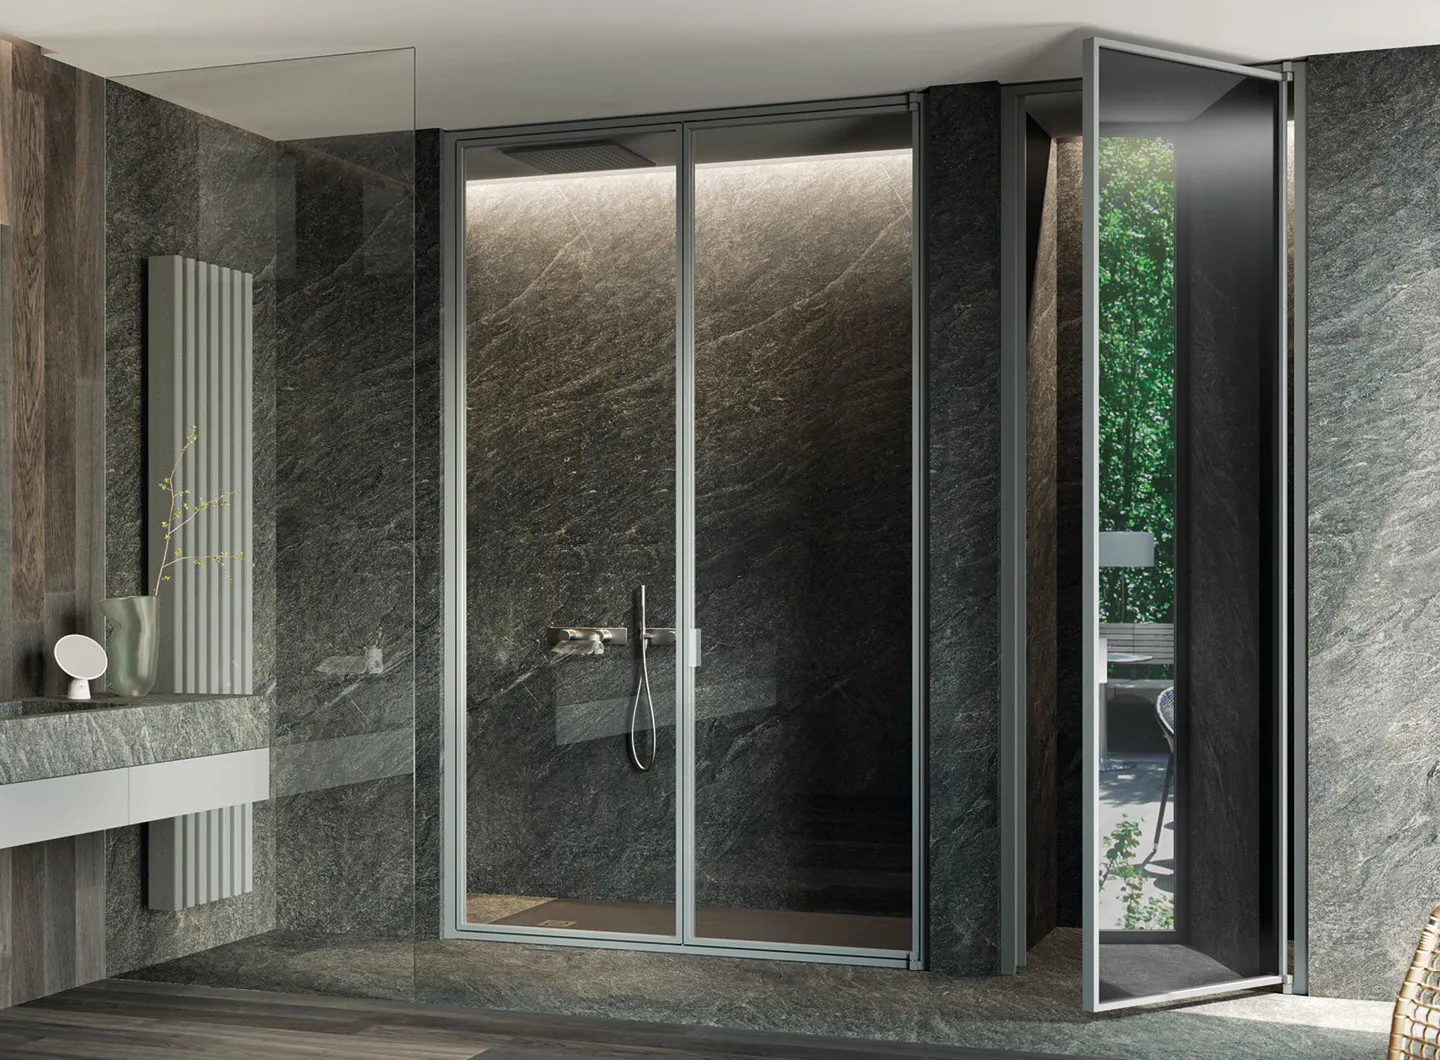 Vismaravetro - Glass partition walls for bathrooms and contract orders - Suite